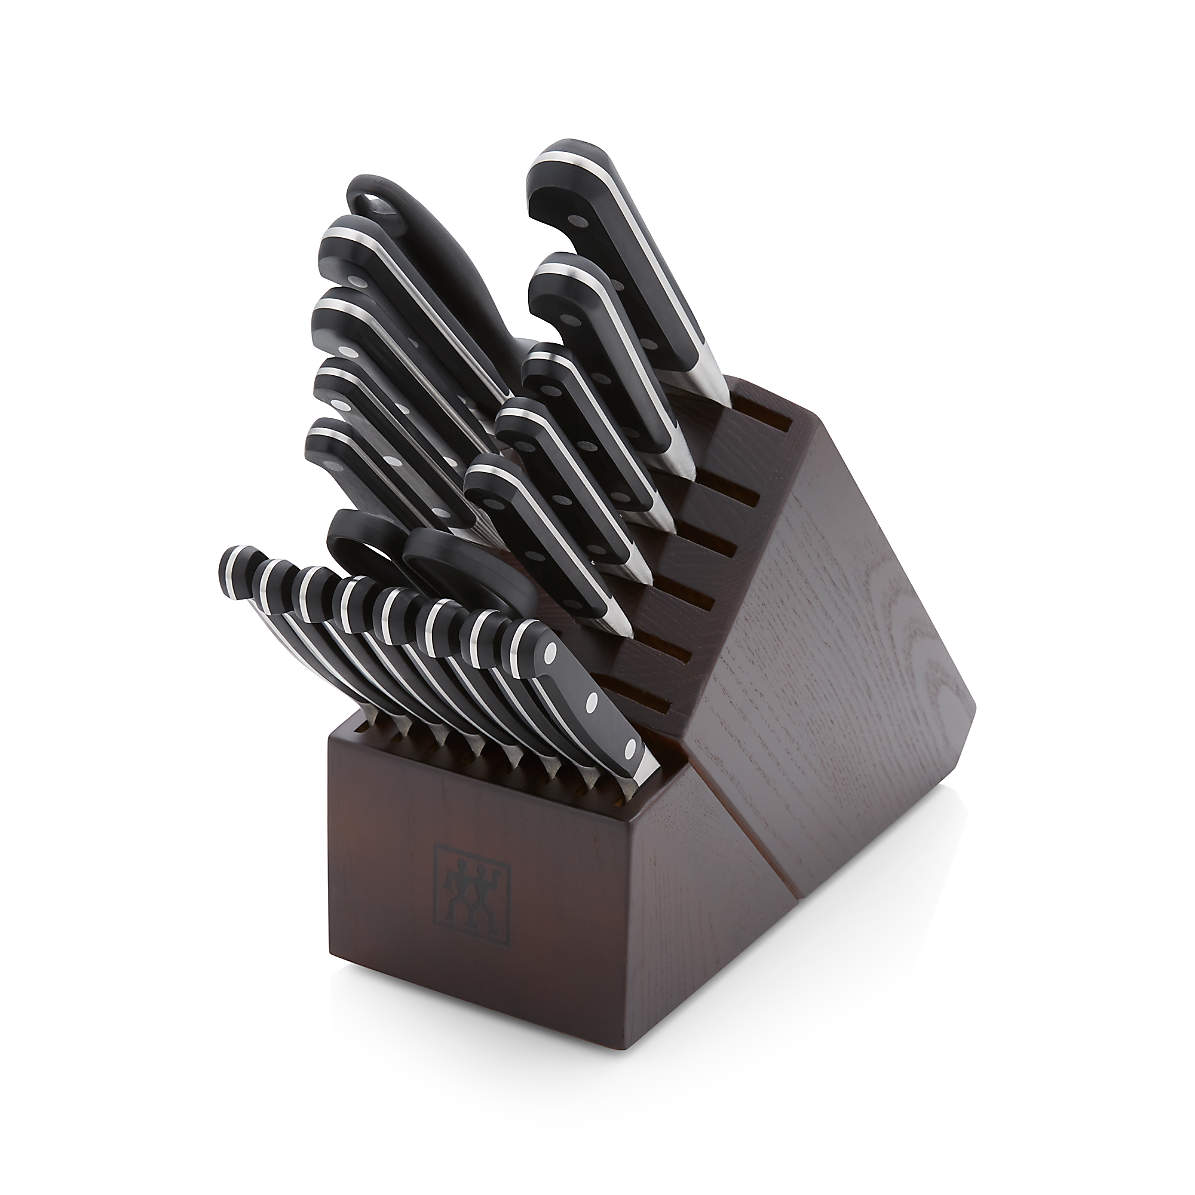 20pc Knife Set with Knife Block